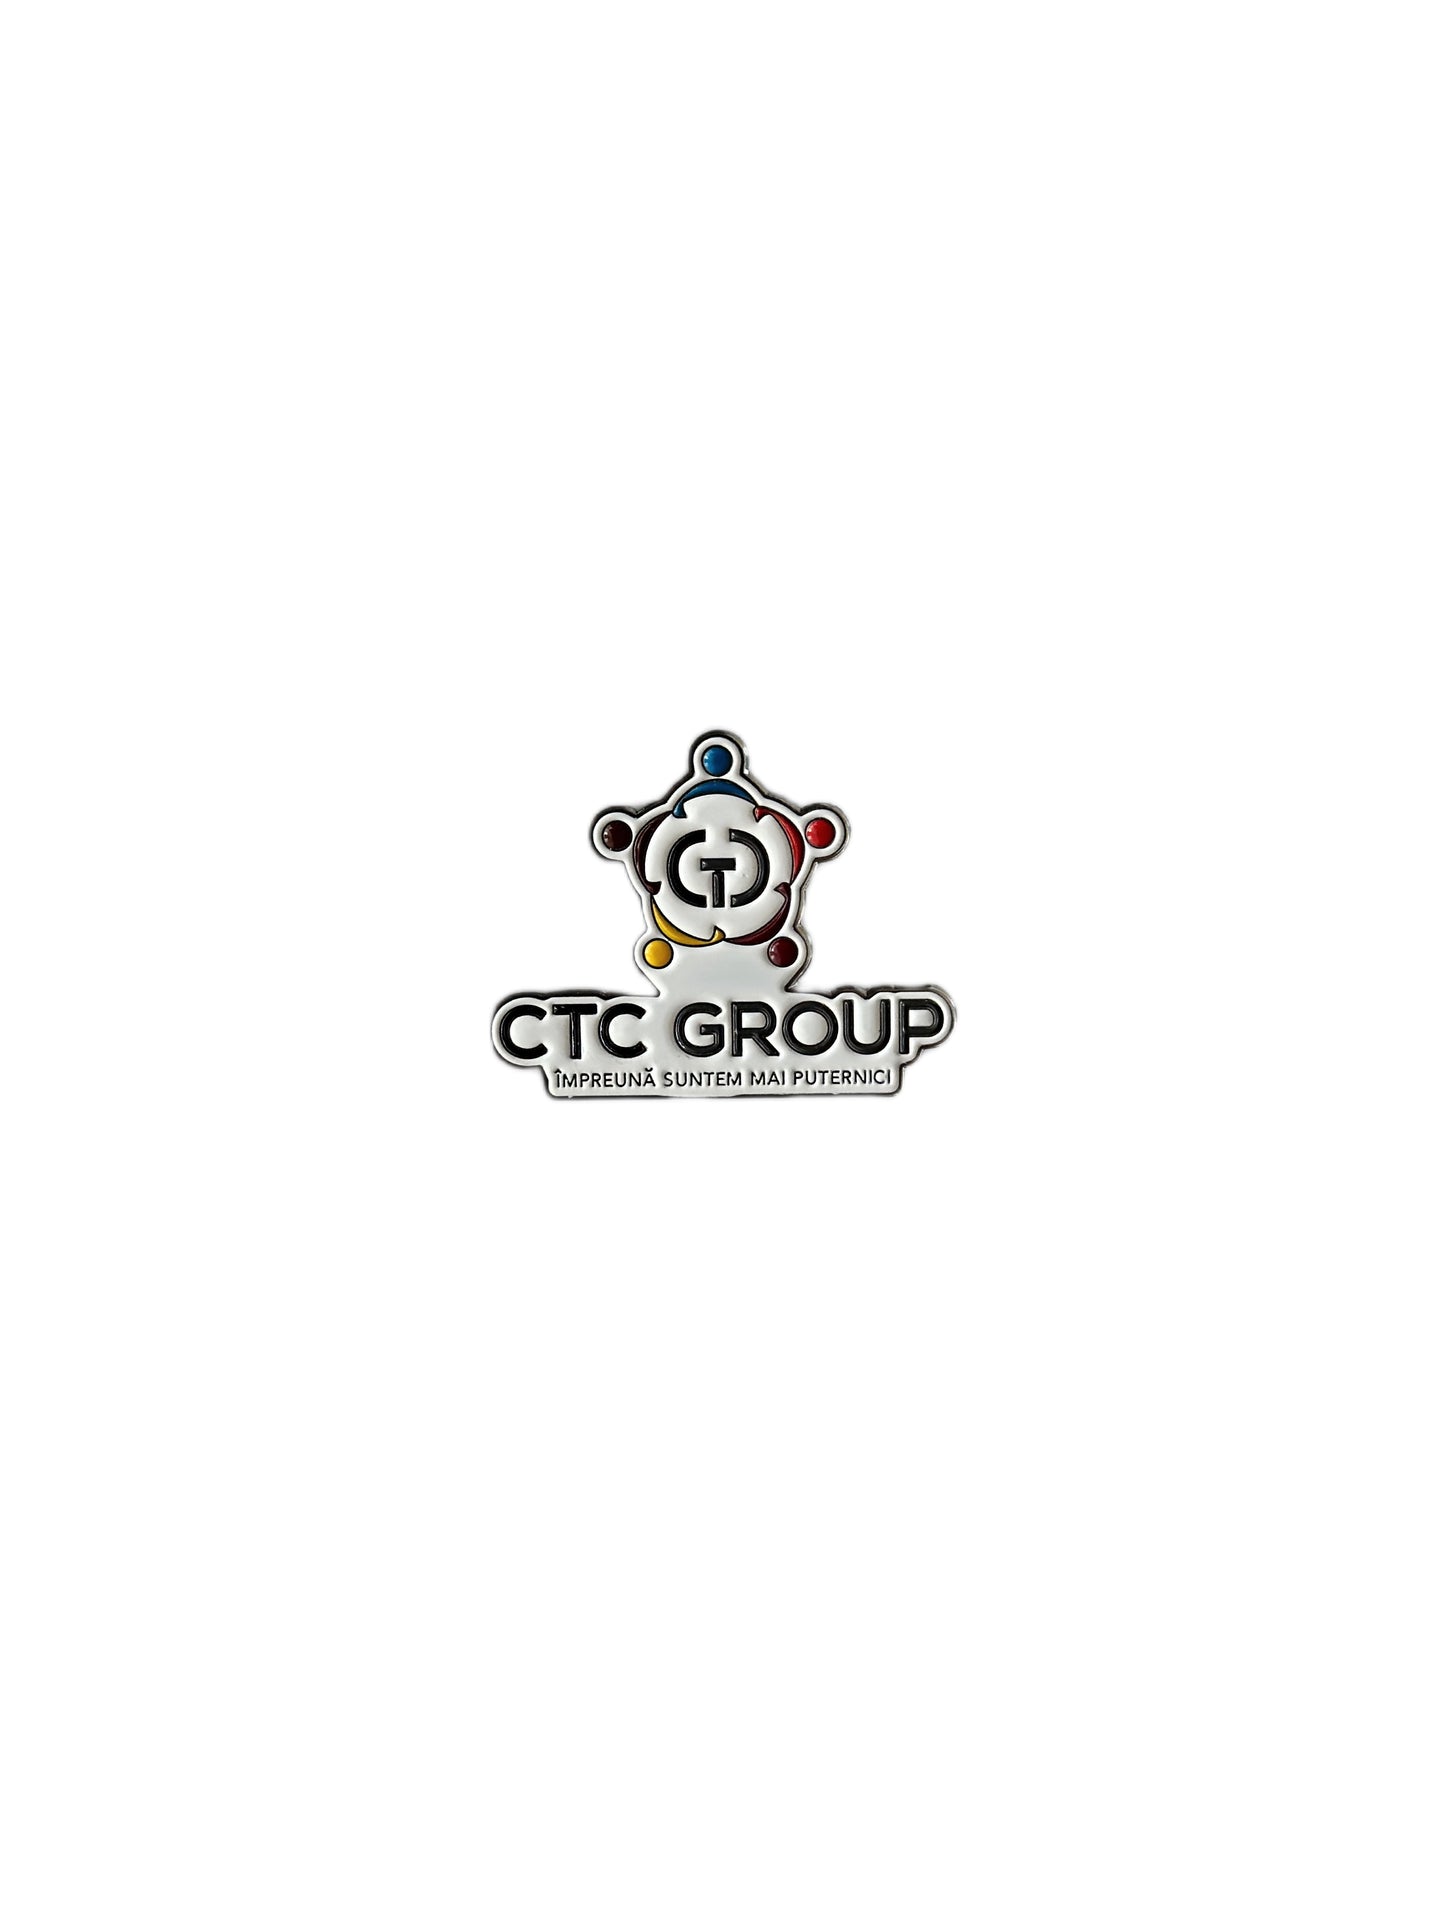 Pins for “ CTC GROUP”